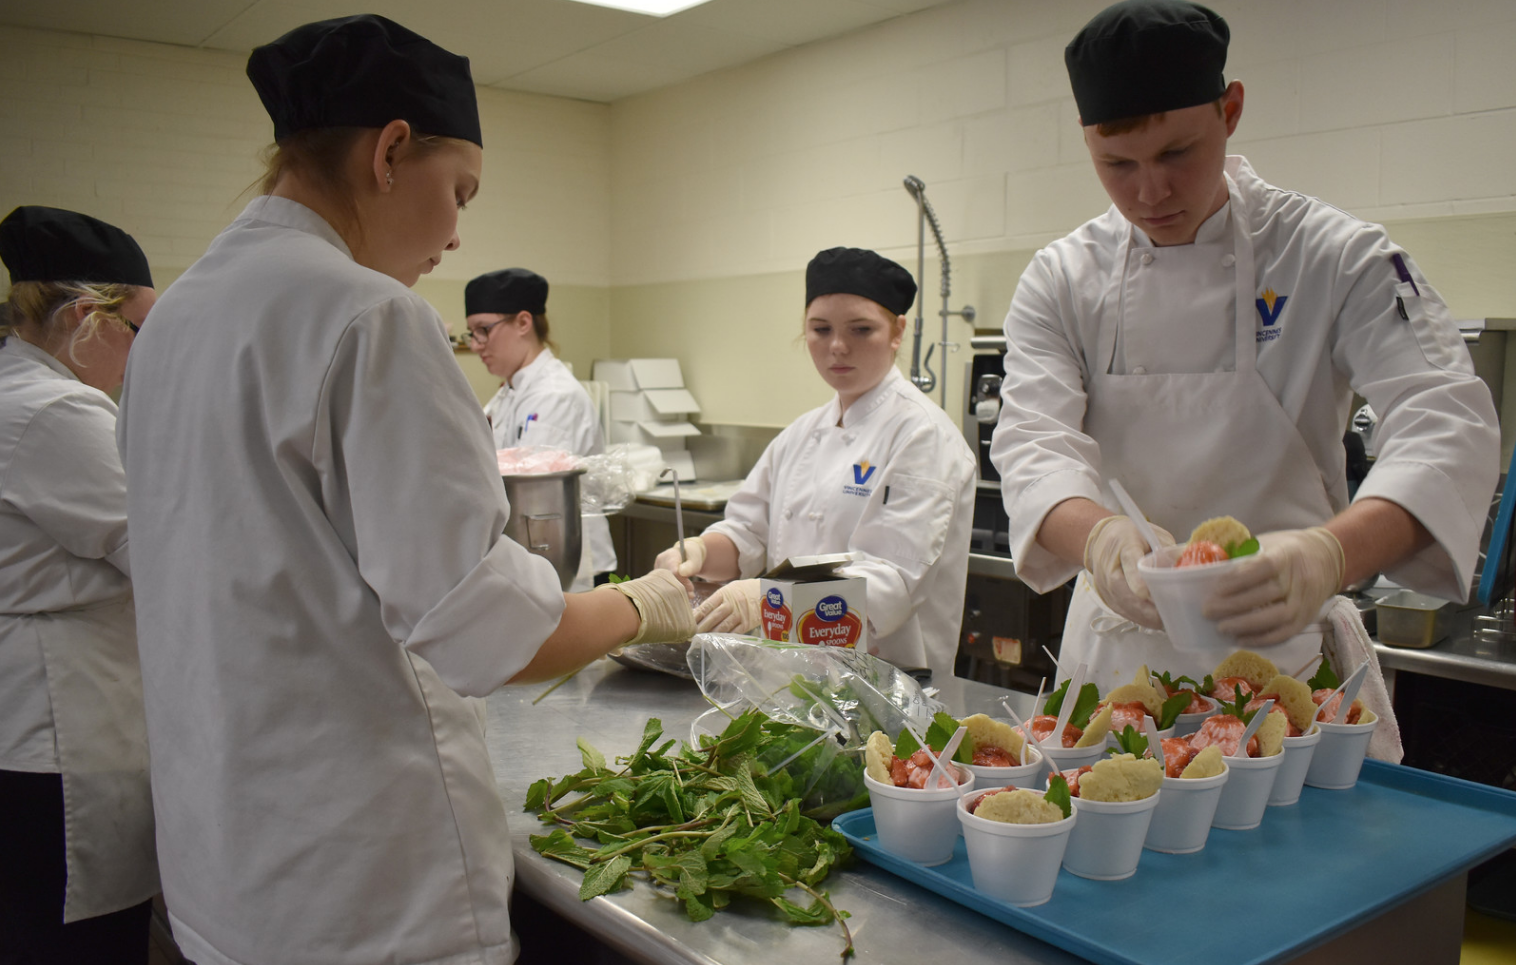 Culinary Arts, Restaurant and Food Services, and Hotel/Motel Management (CG)